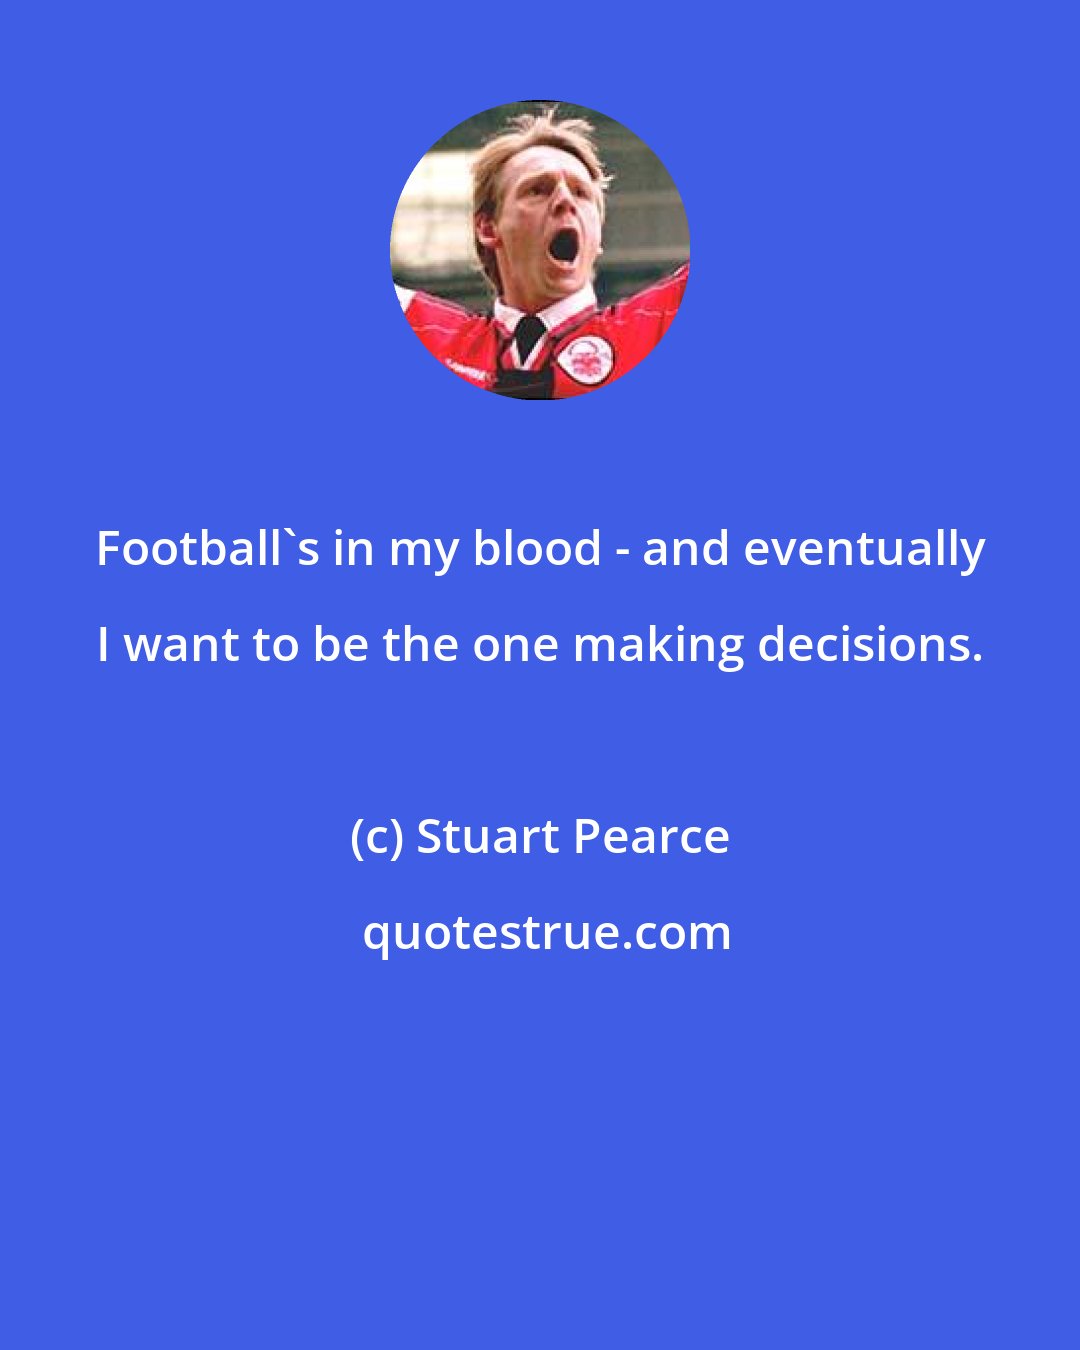 Stuart Pearce: Football's in my blood - and eventually I want to be the one making decisions.